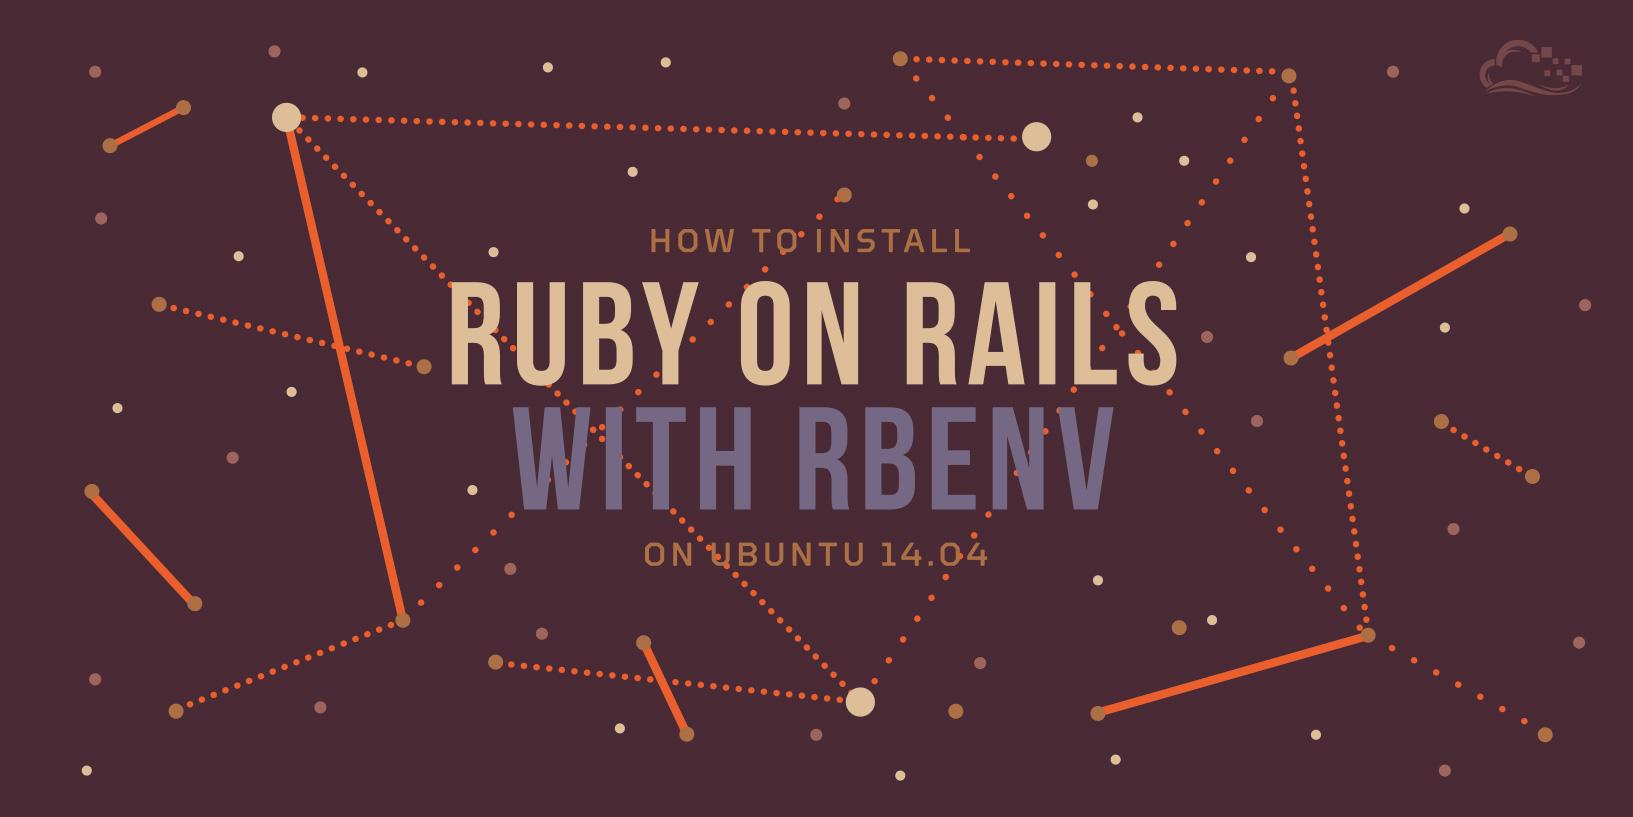 How To Install Ruby on Rails with rbenv on Ubuntu 14.04